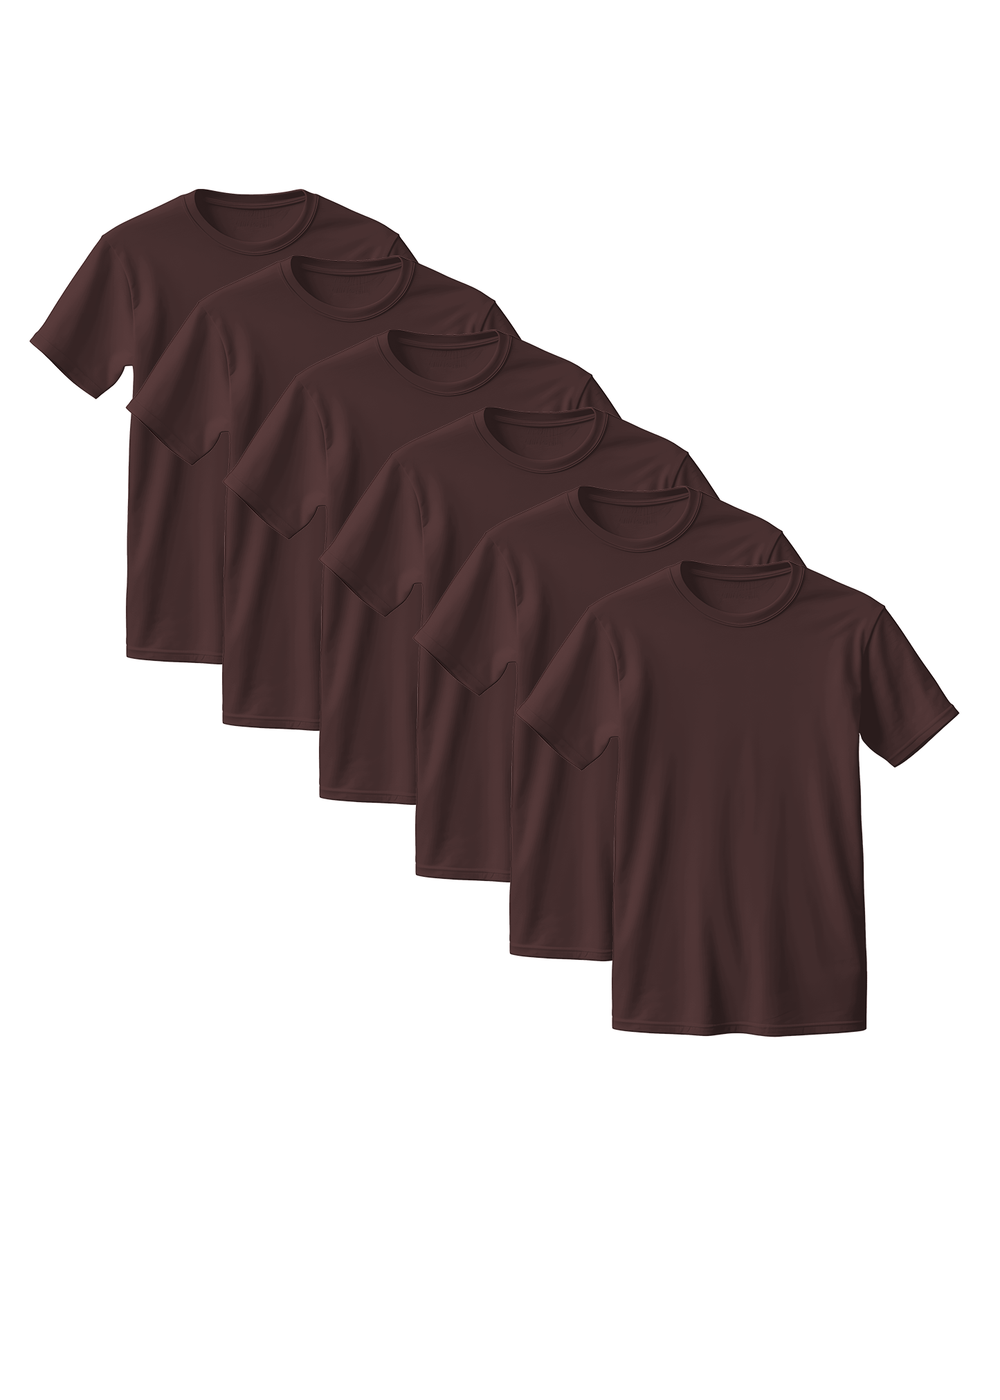 Brown Combed Cotton T-Shirt 6-Pack